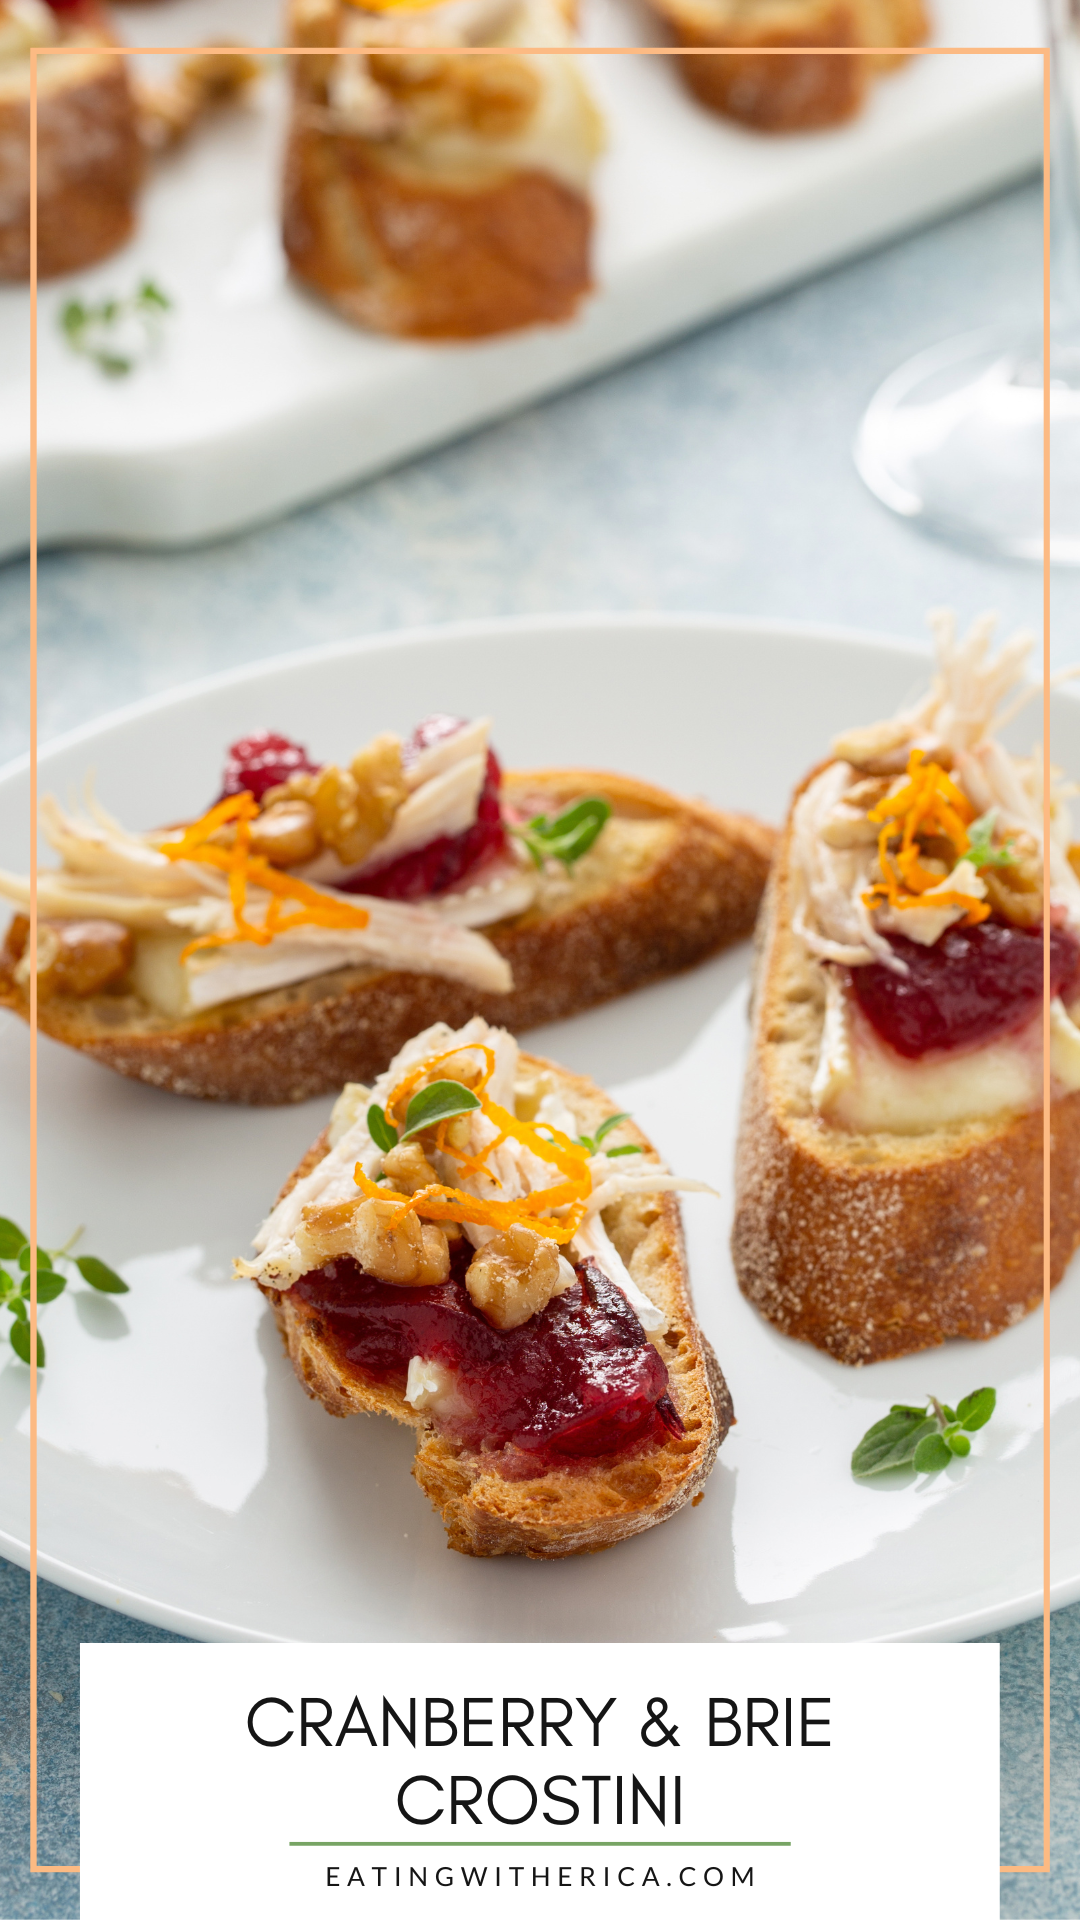 Looking for the perfect holiday appetizer? You need to try these Cranberry & Brie Crostini's - CLICK HERE to make them ASAP!